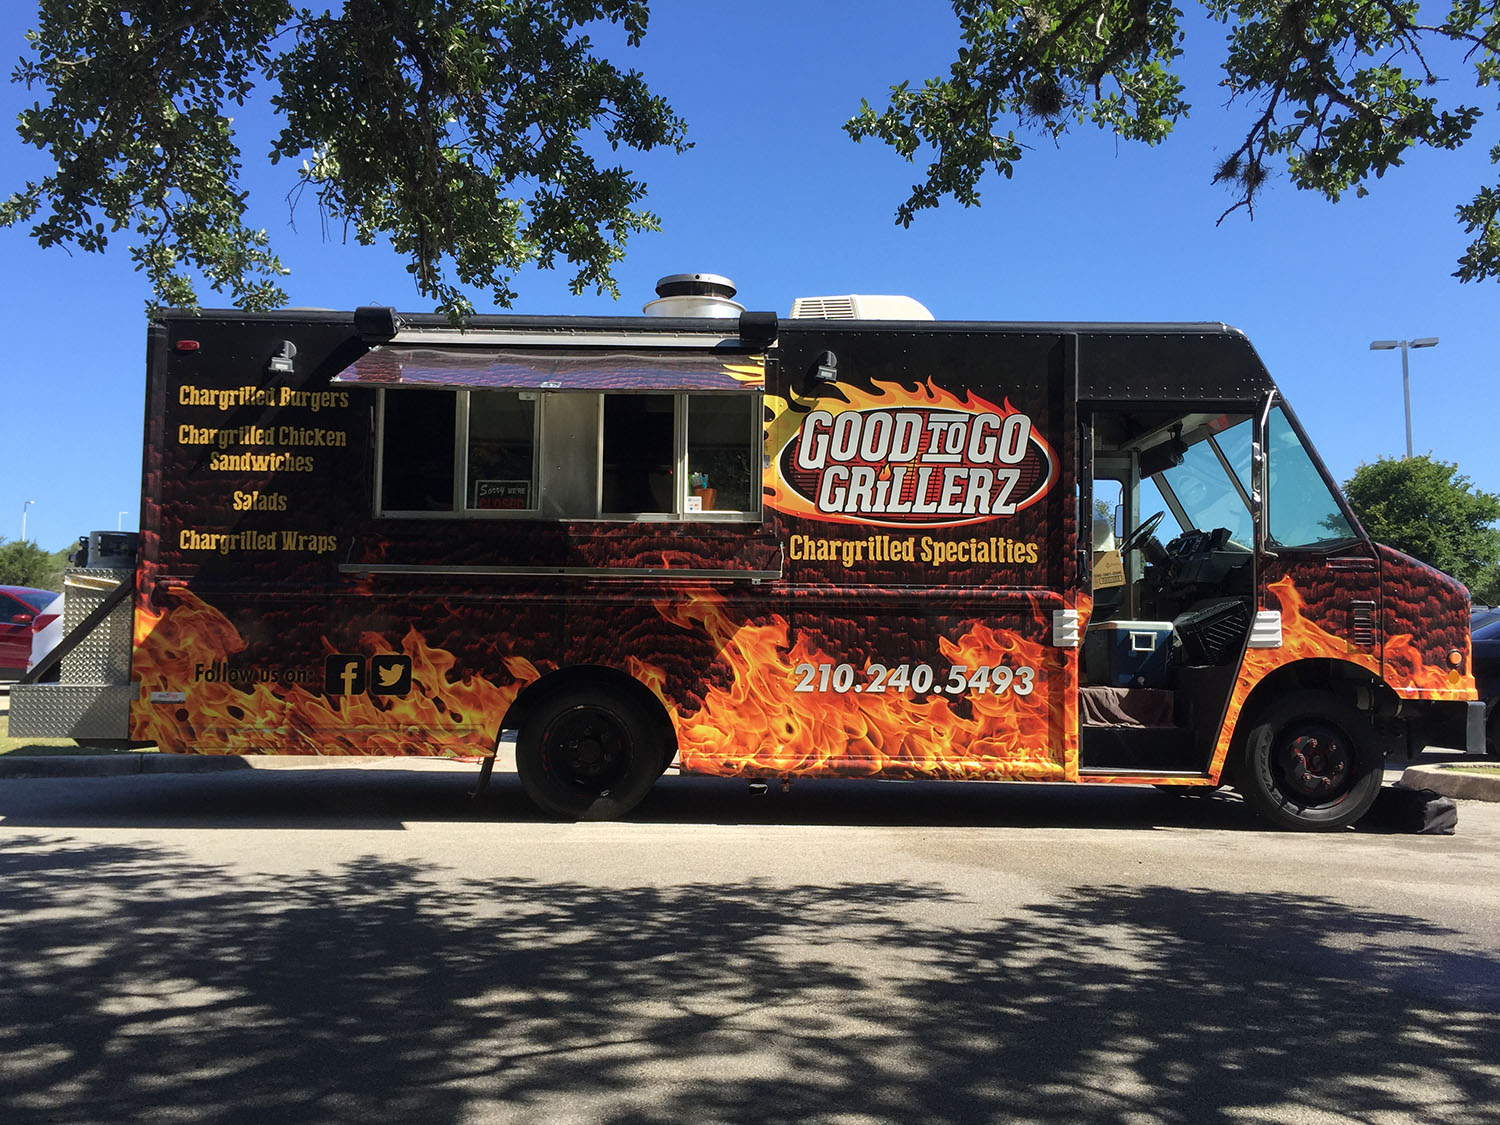 vehicle-car-wraps-graphics-good-to-go-grillerz